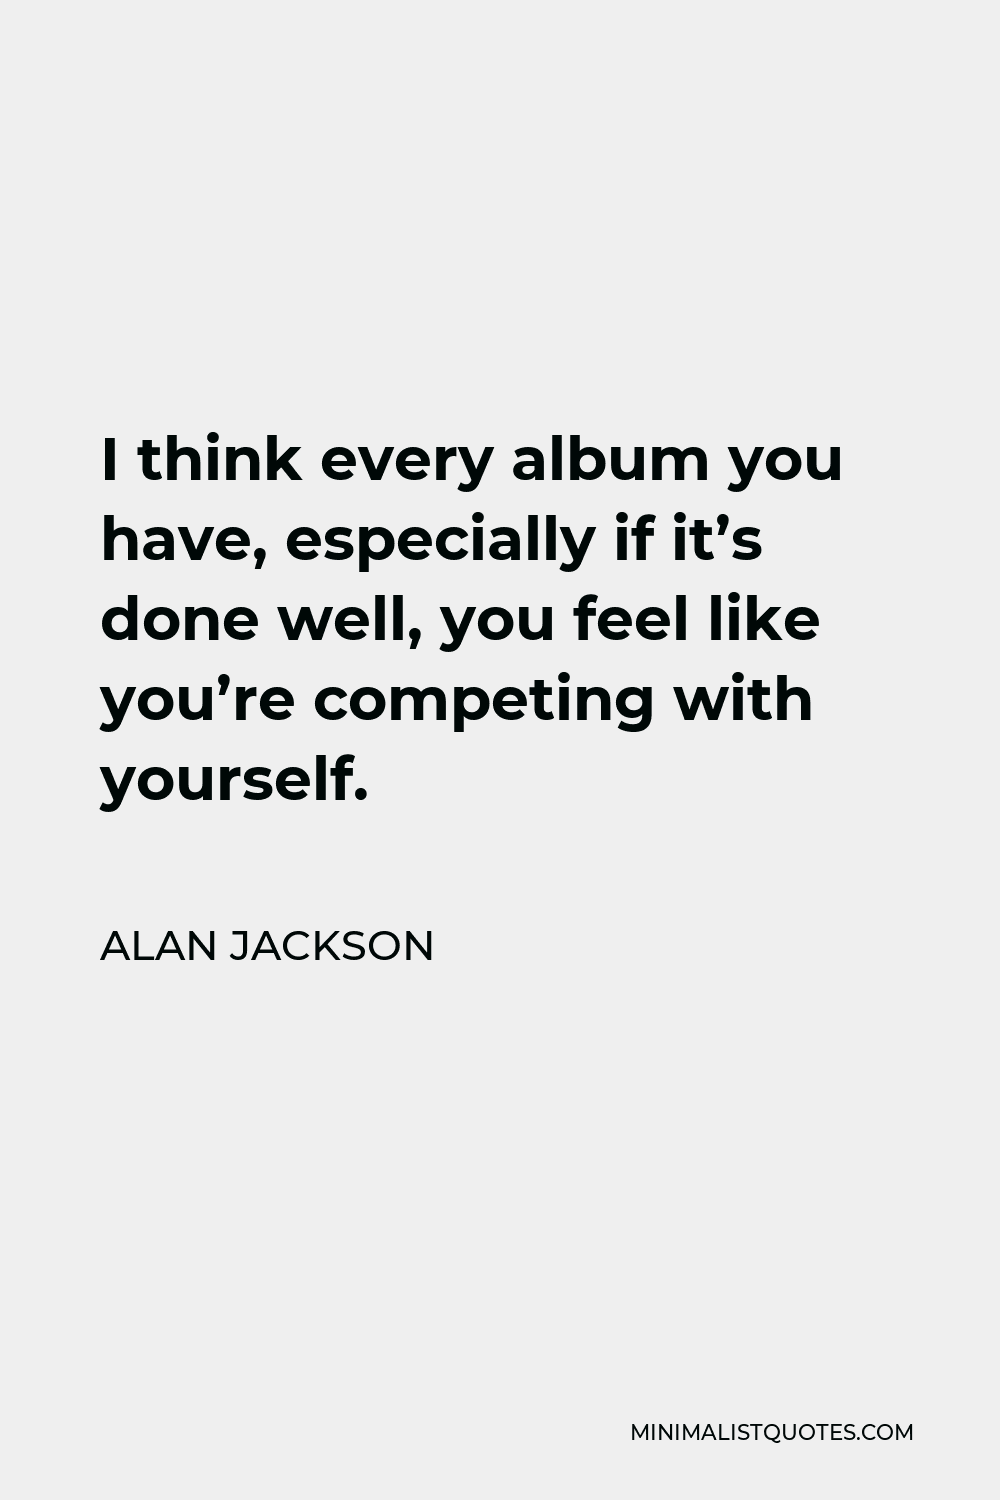 Alan Jackson Quote - I think every album you have, especially if it’s done well, you feel like you’re competing with yourself.